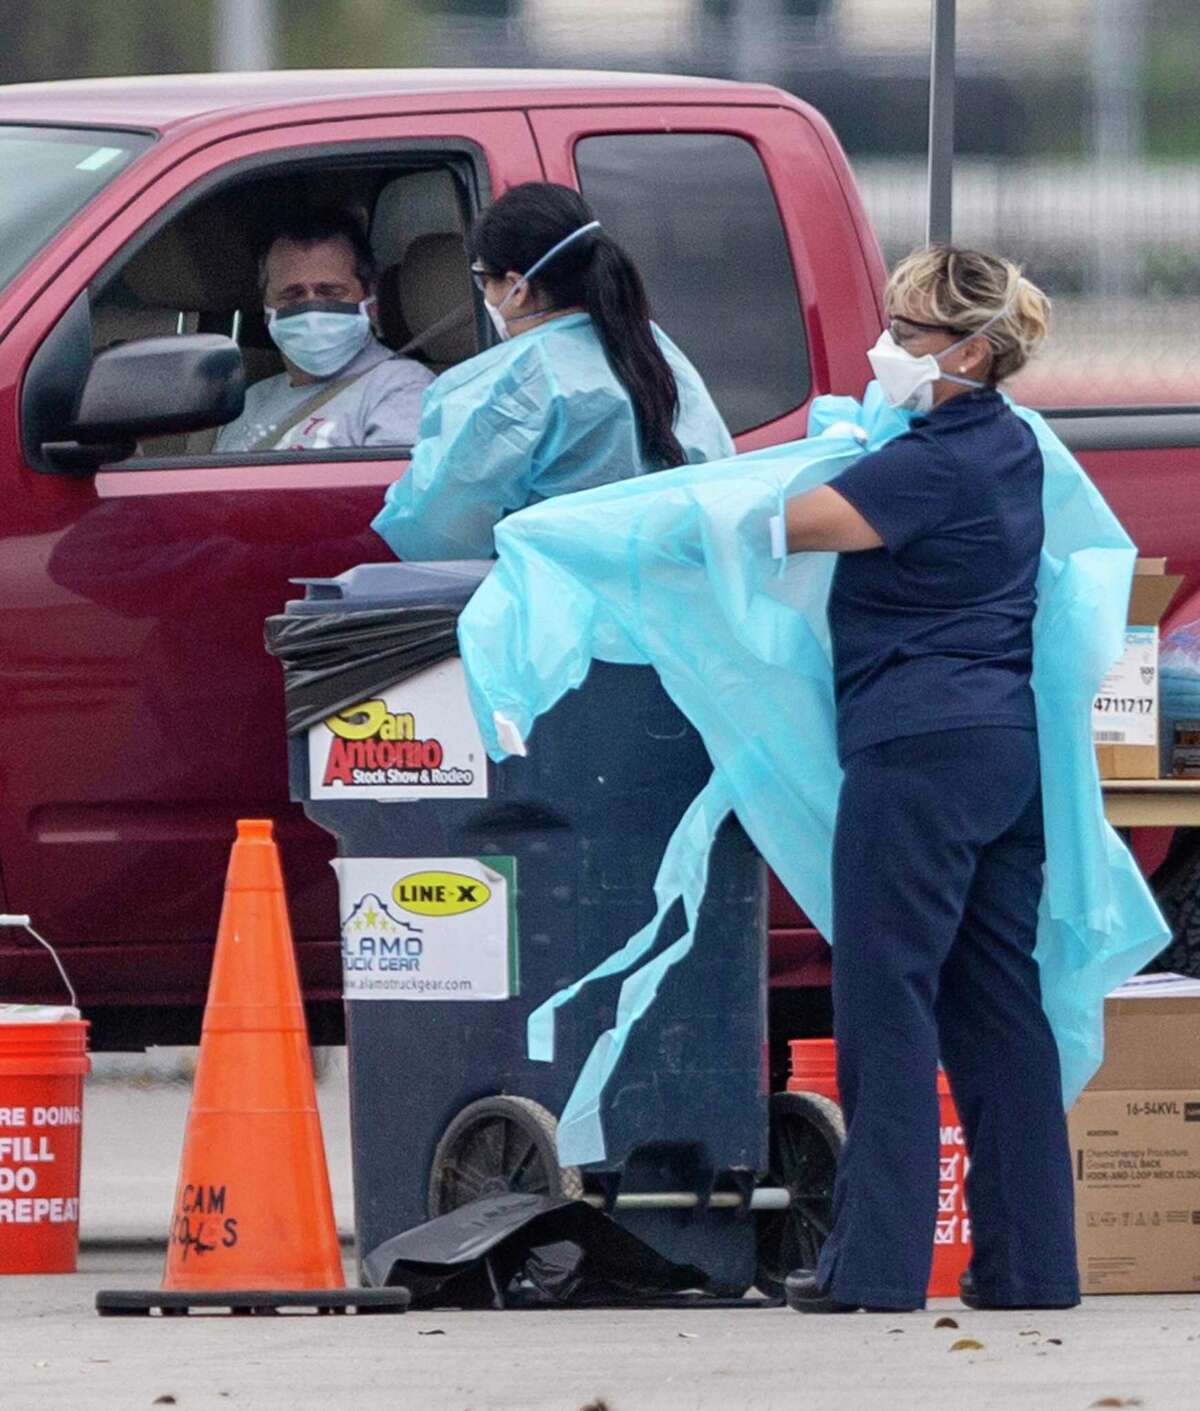 As more people are tested for coronavirus in Bexar County, including at this drive-up test site, more cases are emerging. A woman in her 80s was the first person in Bexar County to die from a coronavirus infection. She died on Saturday, March 21, 2020, while in hospice care.